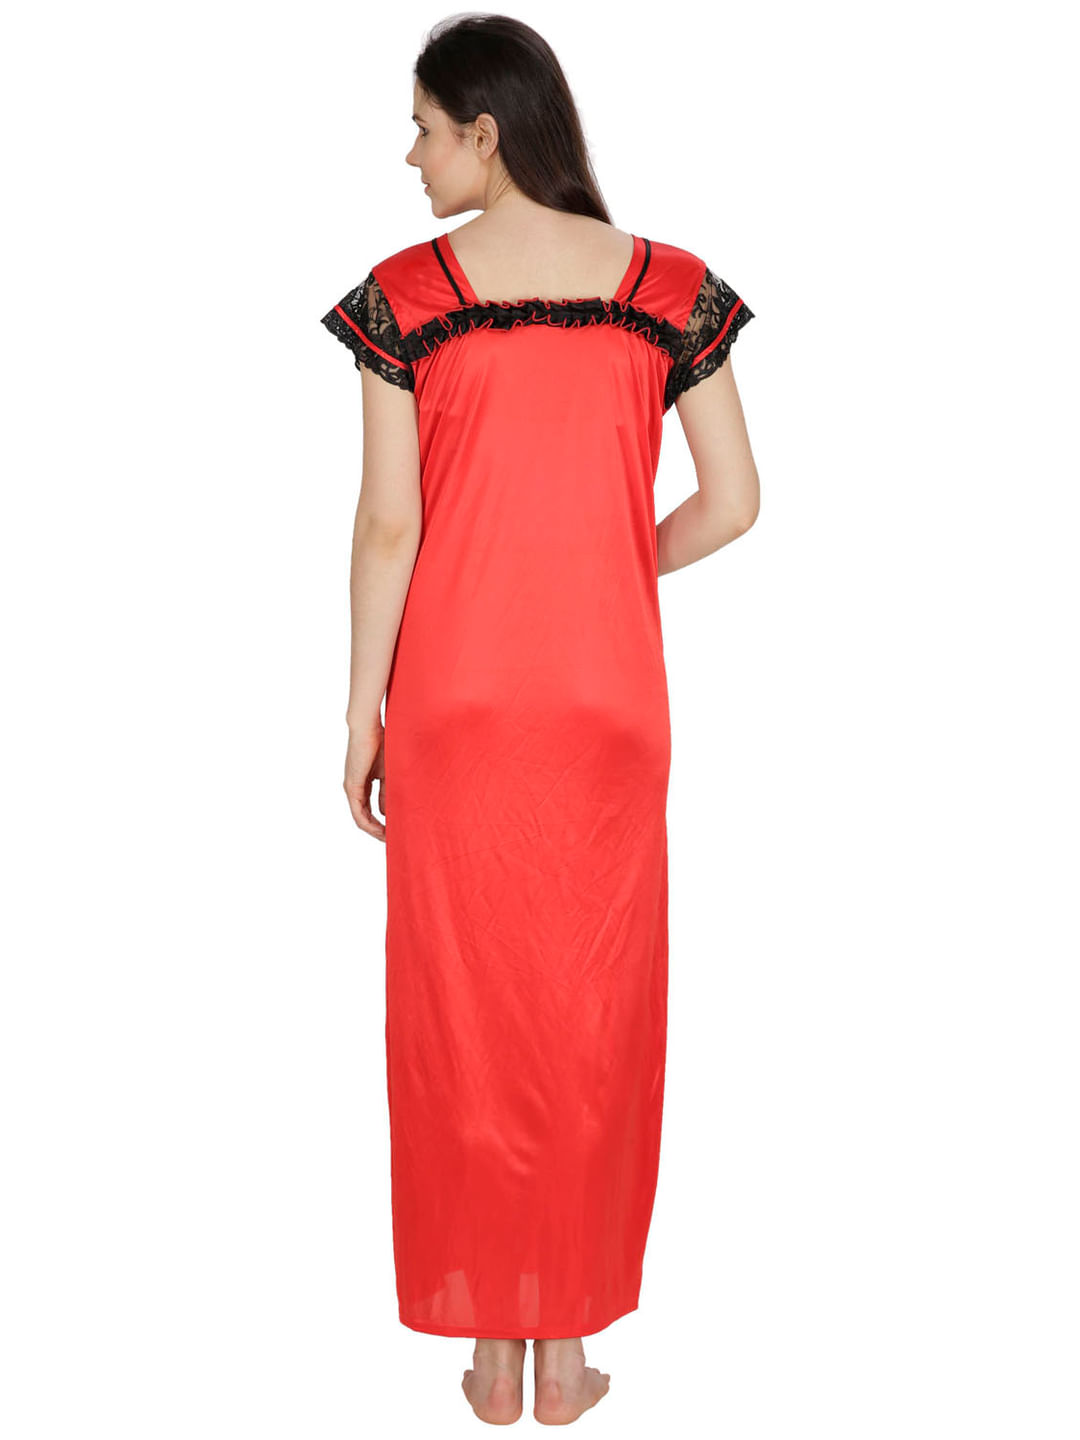 Satin Red Nighty (Red, Free Size)